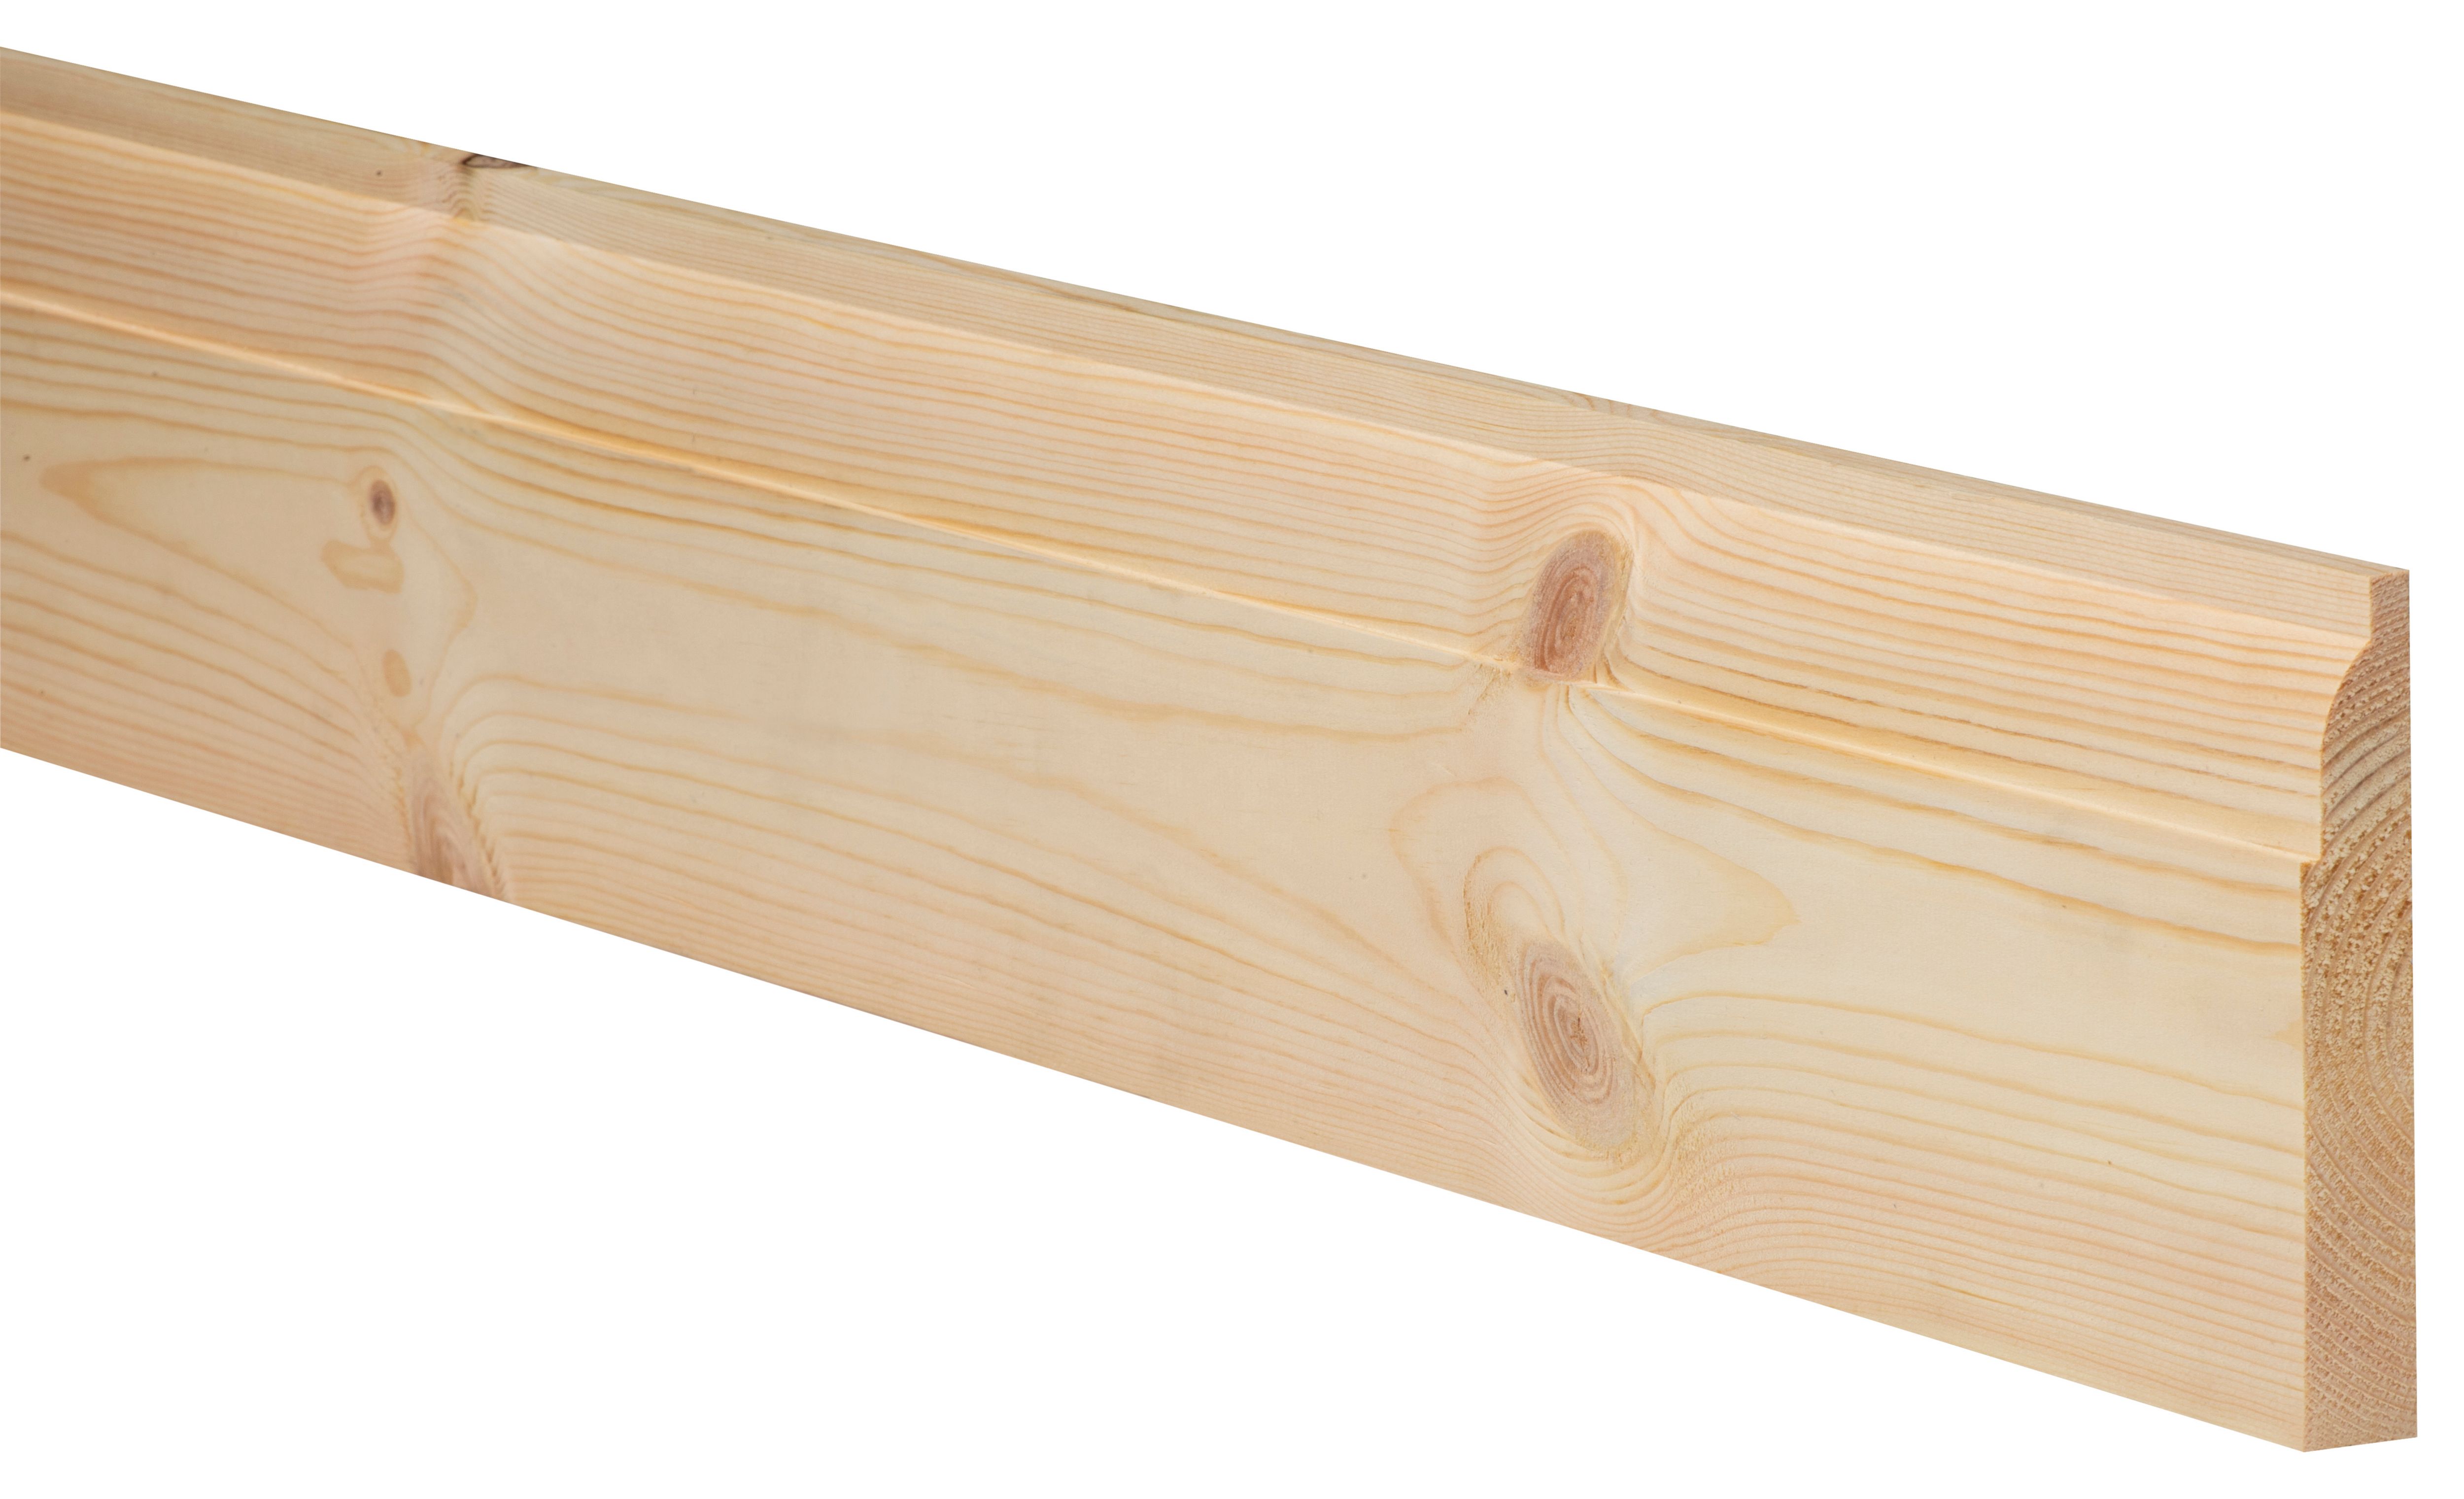 Wickes Ovolo Natural Pine Skirting - 19 x 119 x 4200mm